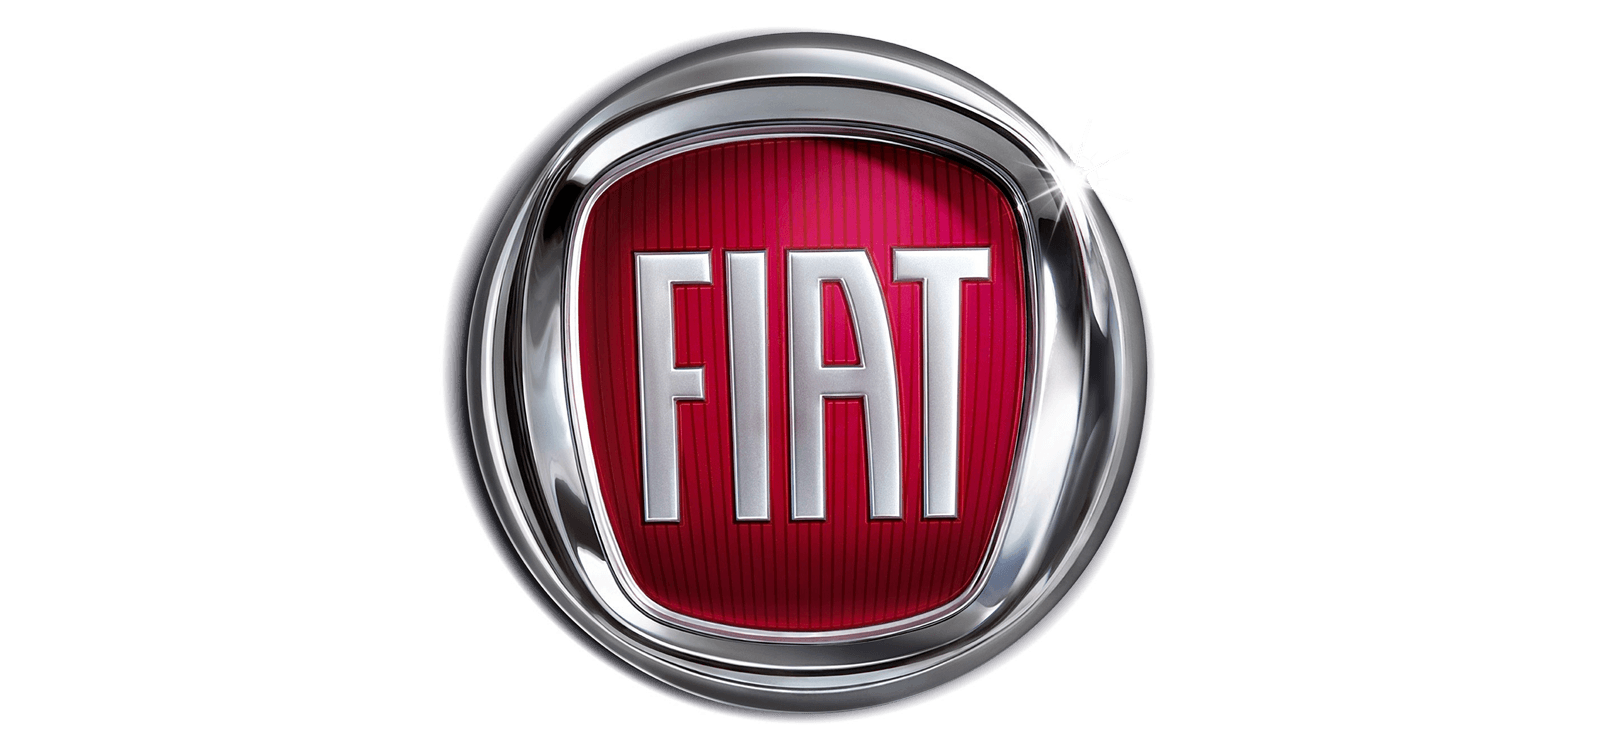 Red Fiat Logo - Fiat Logo Meaning and History. Symbol Fiat. World Cars Brands